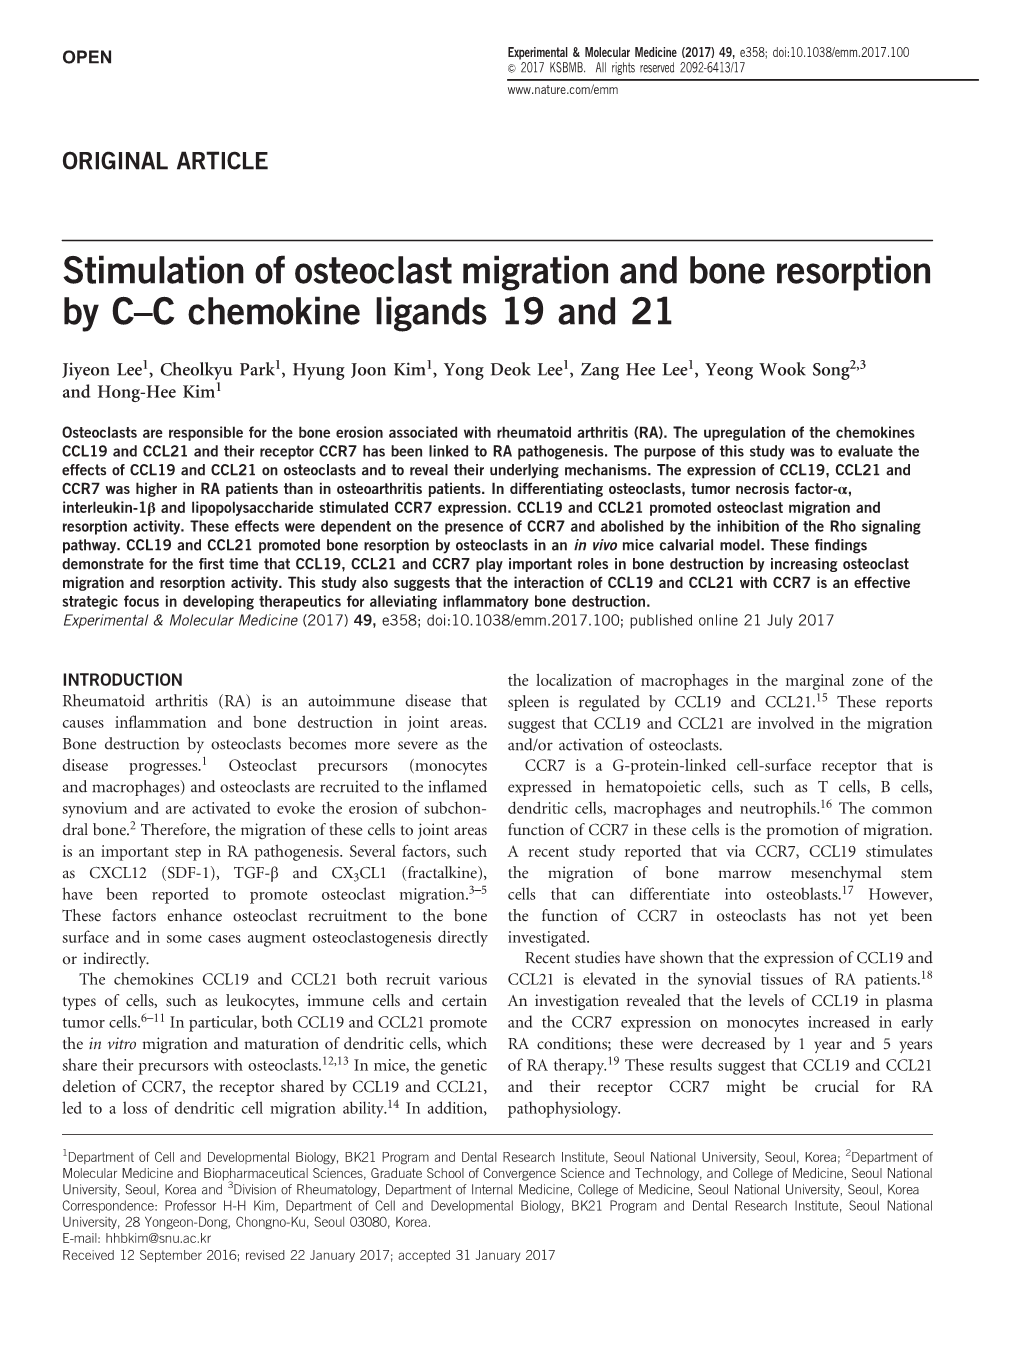 Stimulation of Osteoclast Migration and Bone Resorption by C–C Chemokine Ligands 19 and 21